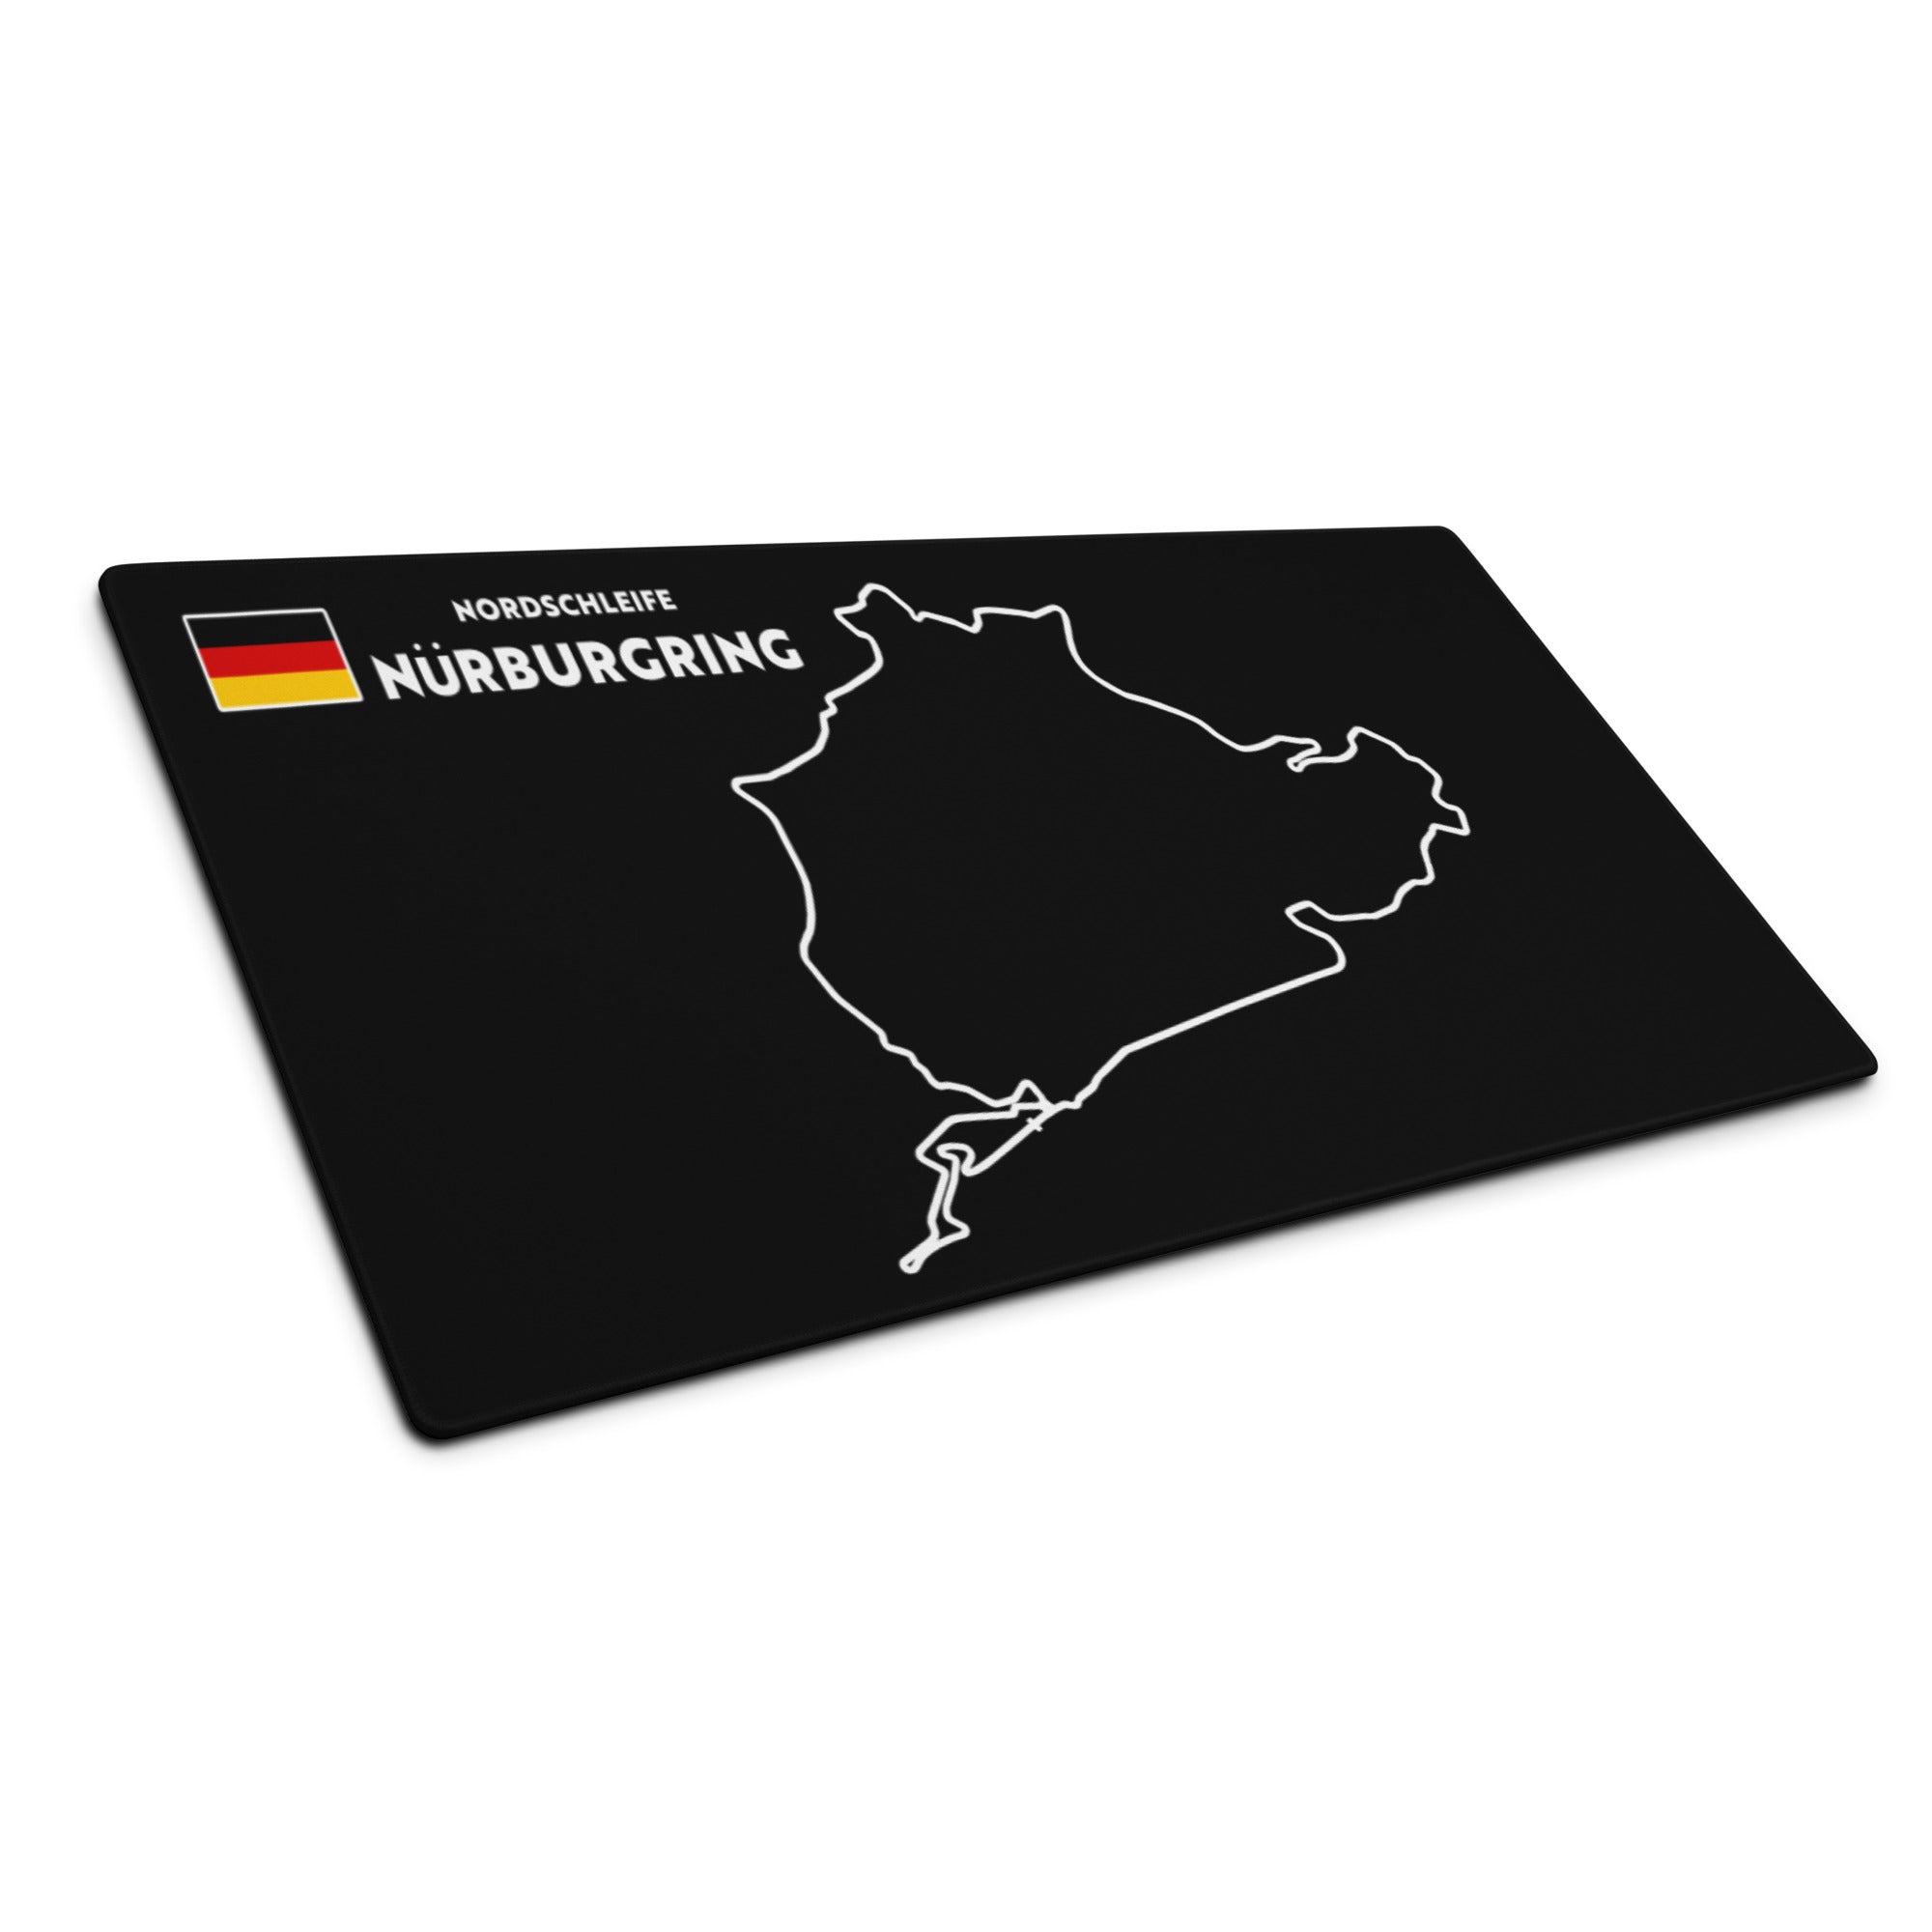 Nurburgring nordschleife f1 24 hours race track circuit mouse pad black large